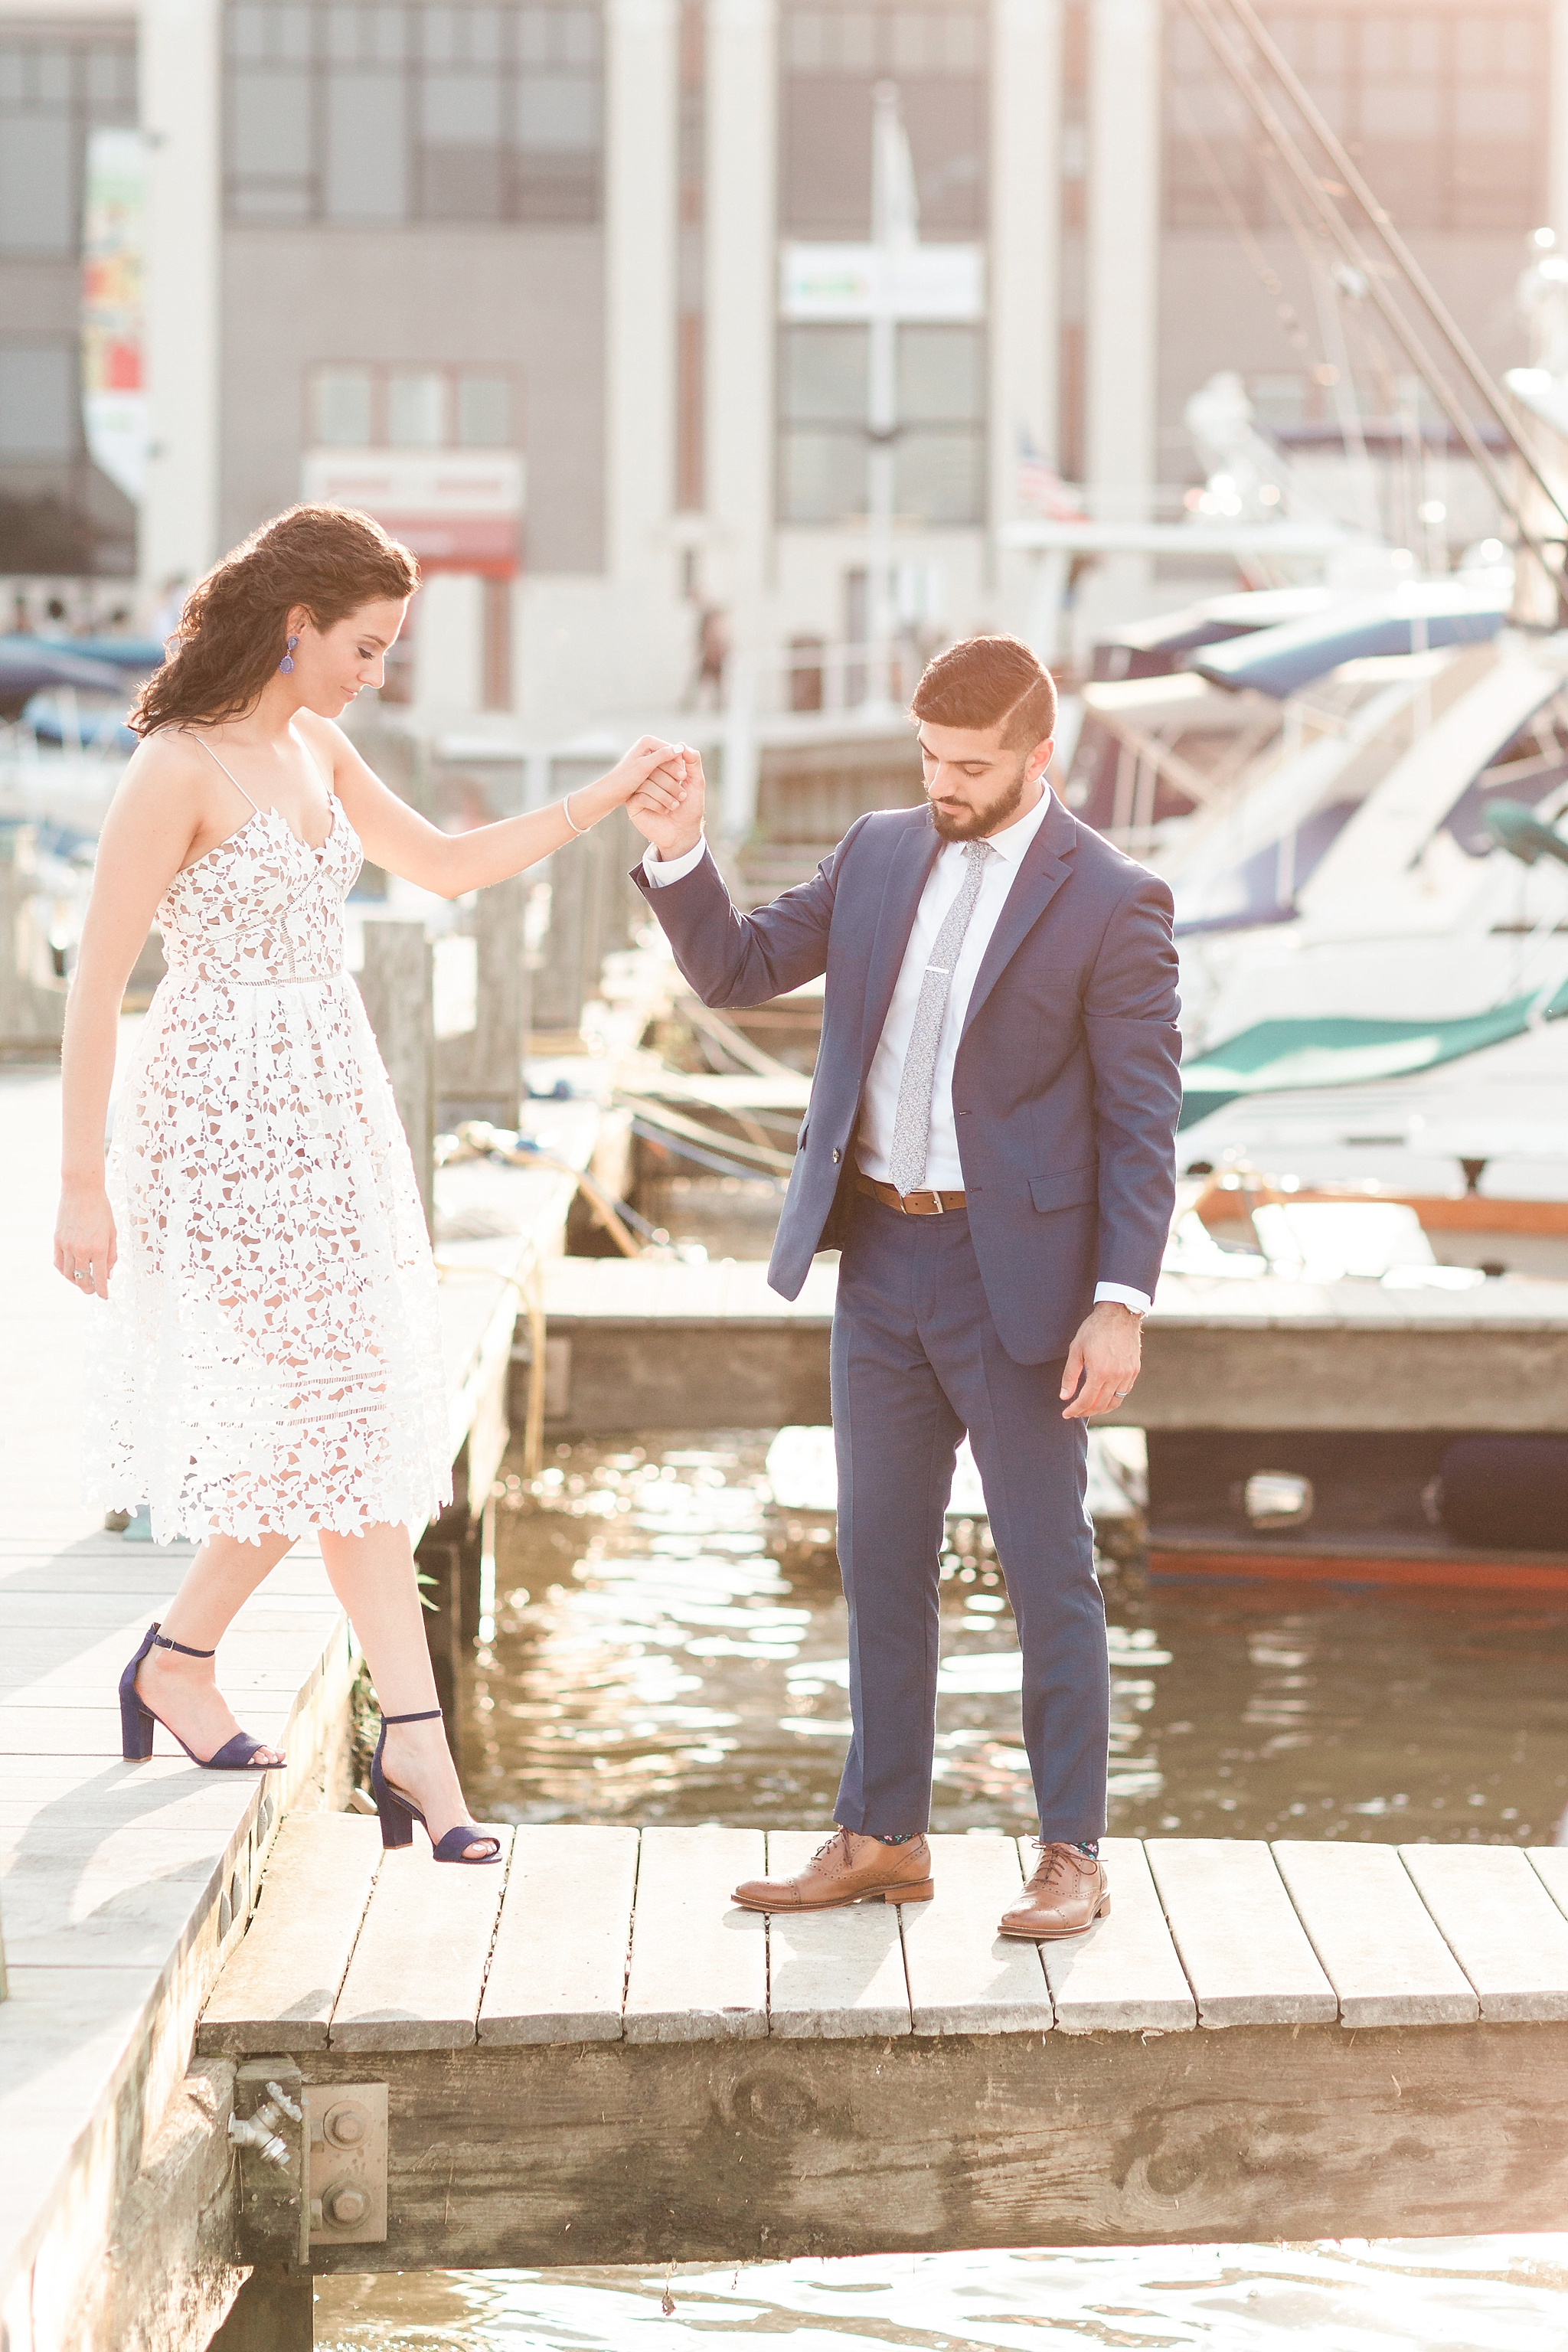 This romantic and intimate Old Town Alexandria elopement was photographed by Washington, DC wedding photographer Alicia Lacey.